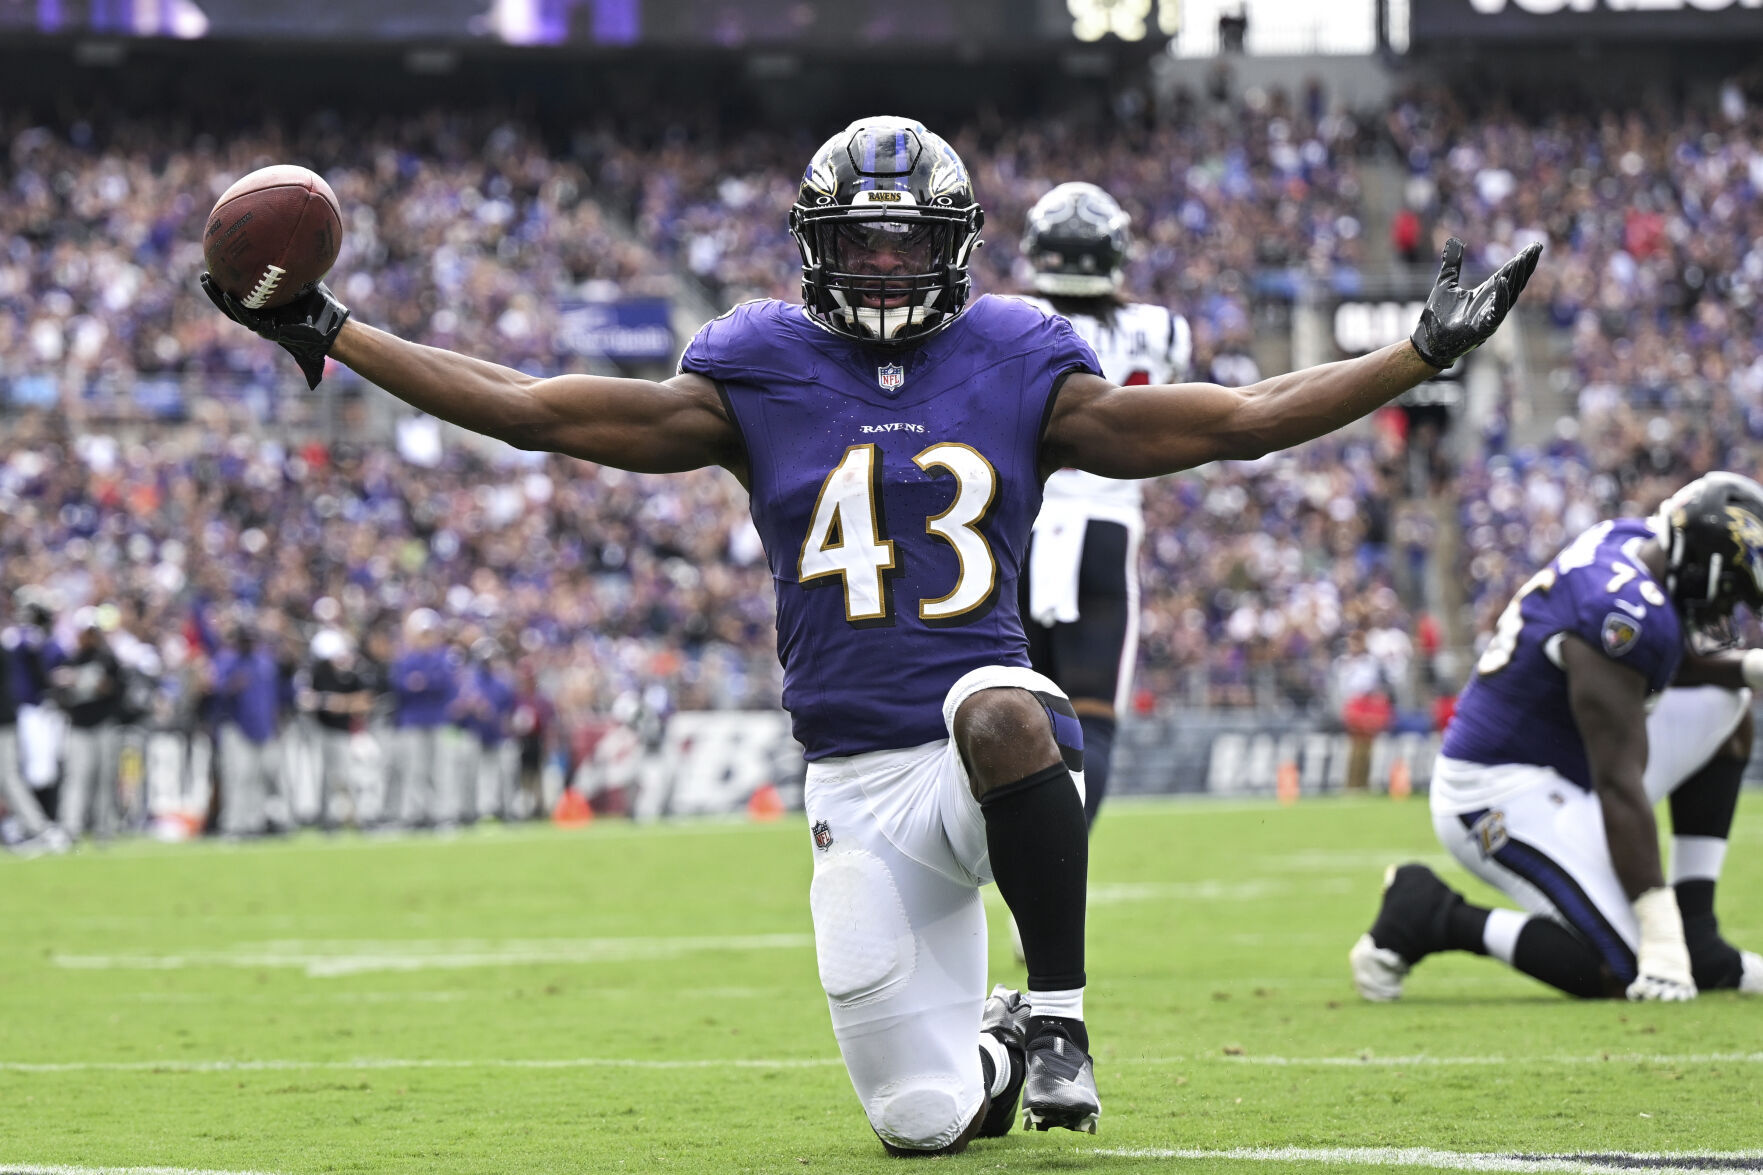 Ravens beat Texans 25-9, but will be without RB J.K. Dobbins